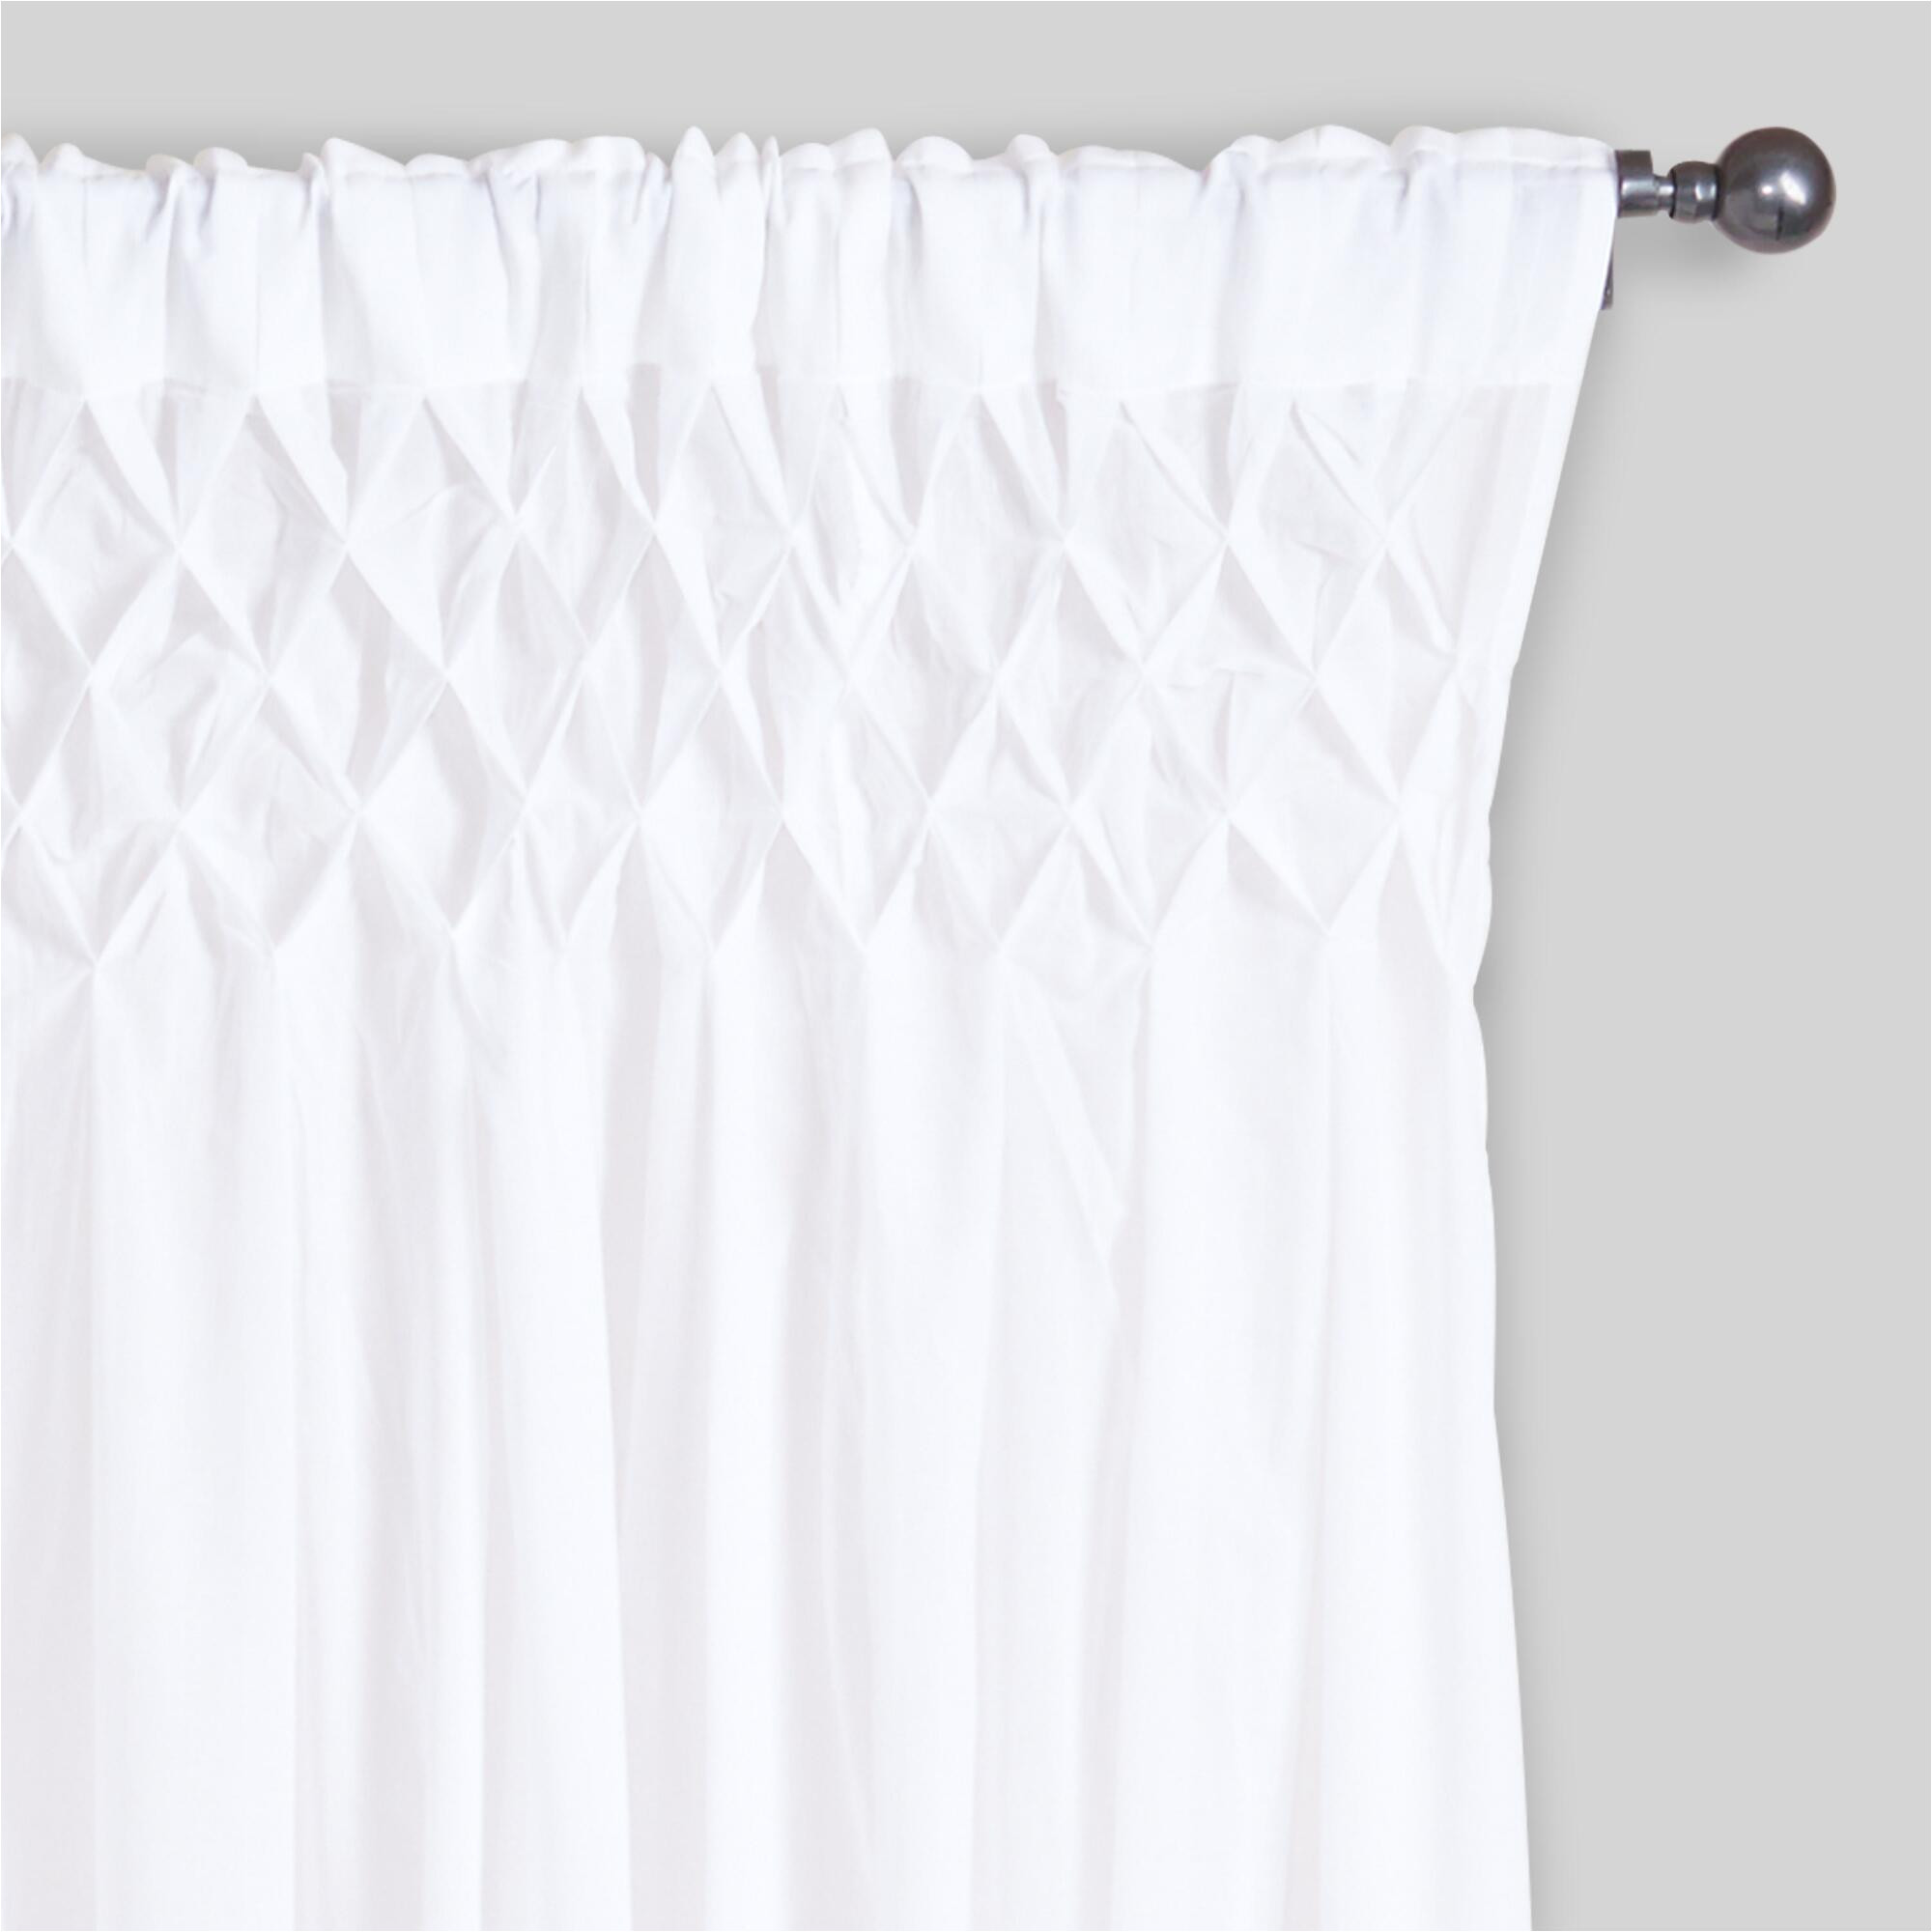 white smocked top cotton curtains set of 2